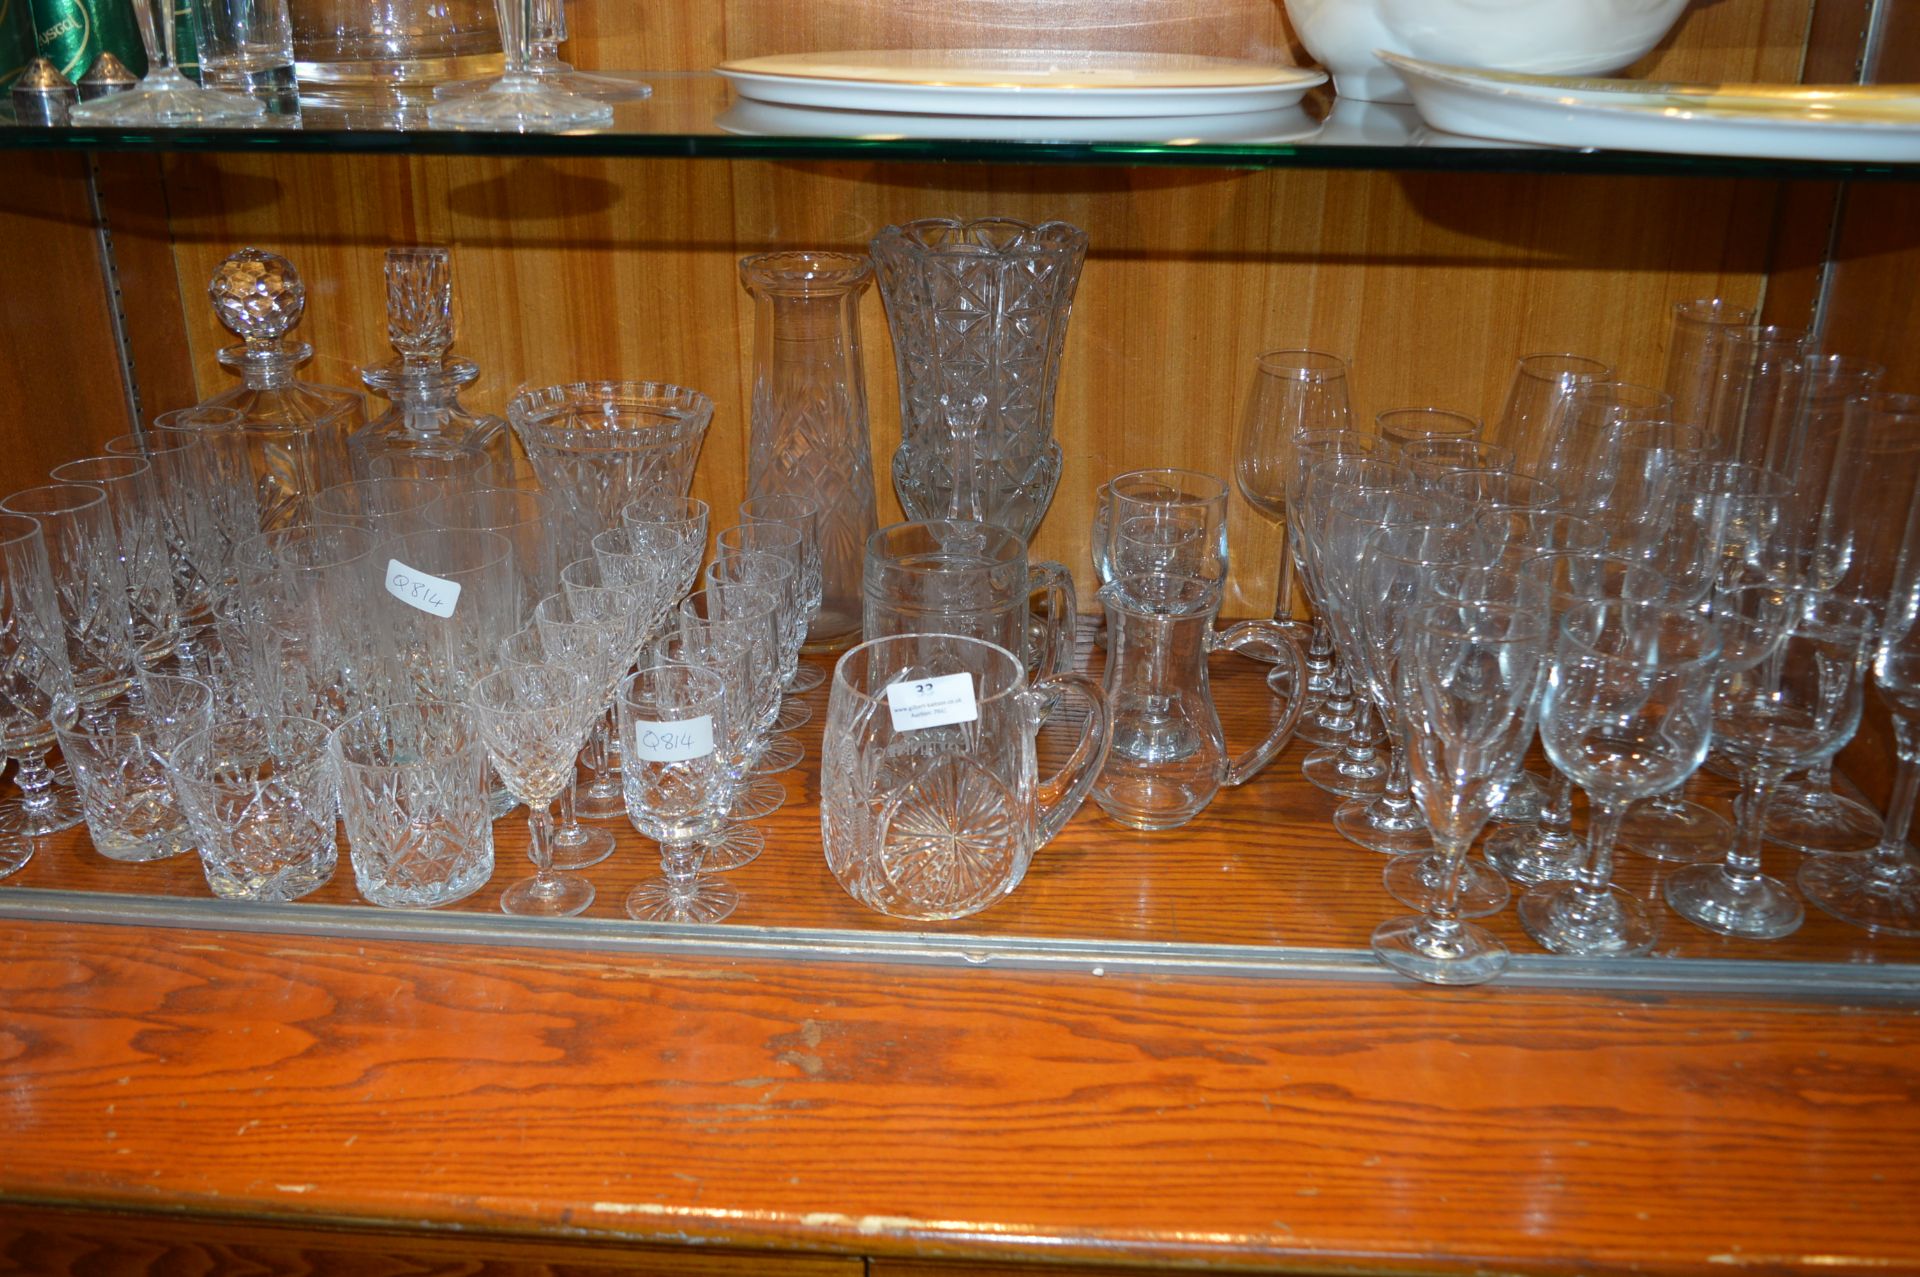 Large Quantity of Drinking Glassware, Decanters, V